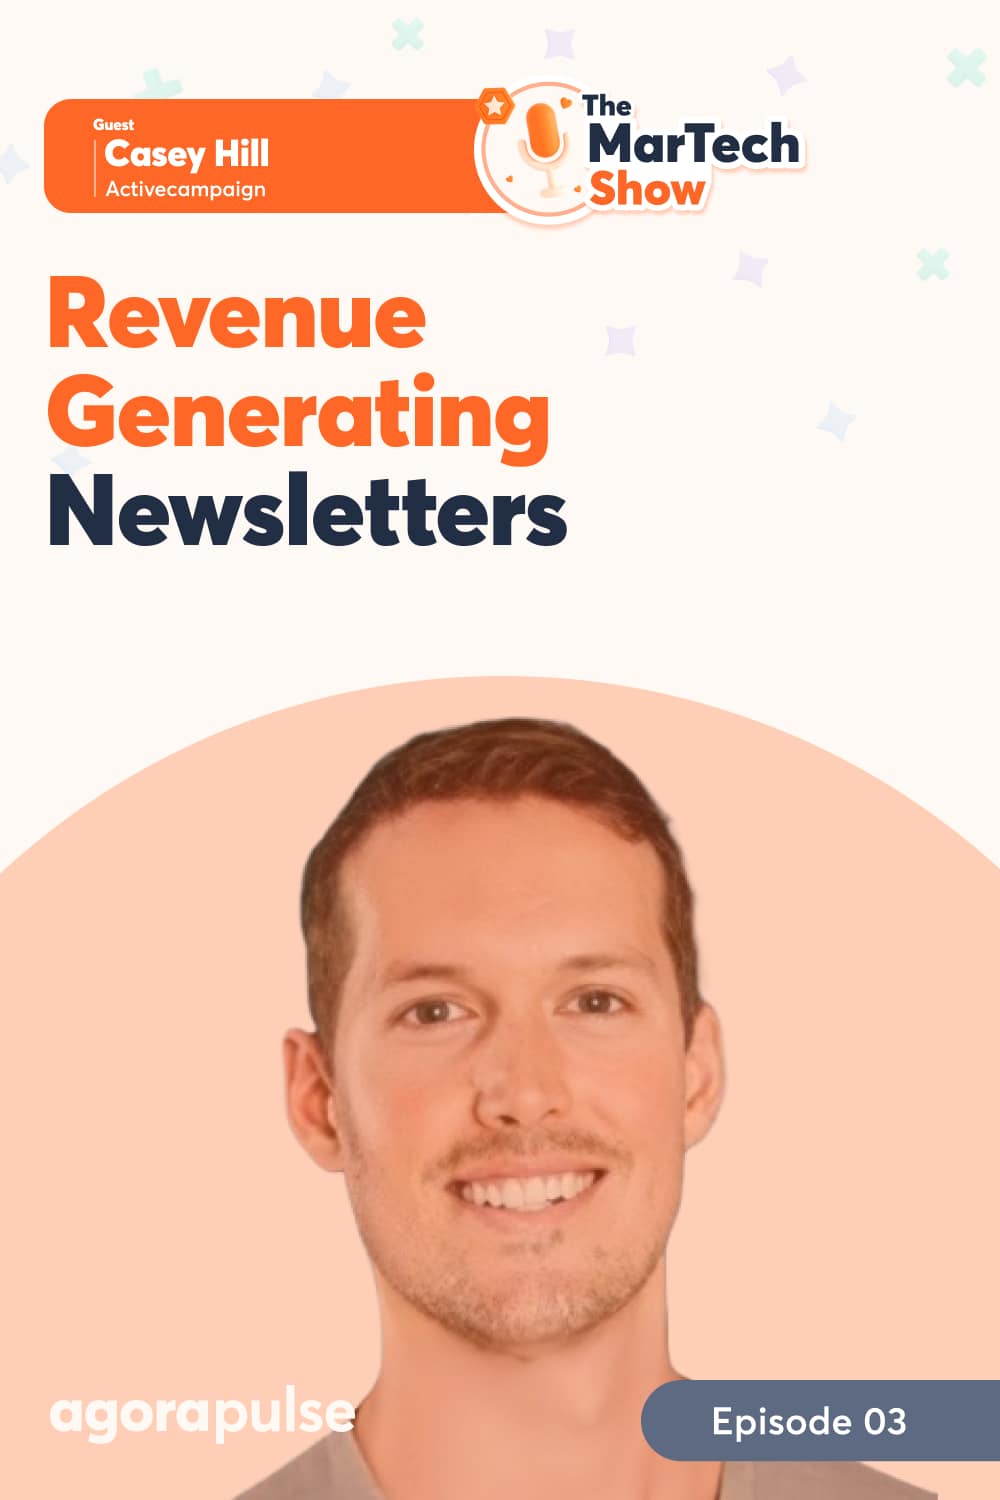 How to Create a Newsletter That Generates Revenue [Podcast & Recap]